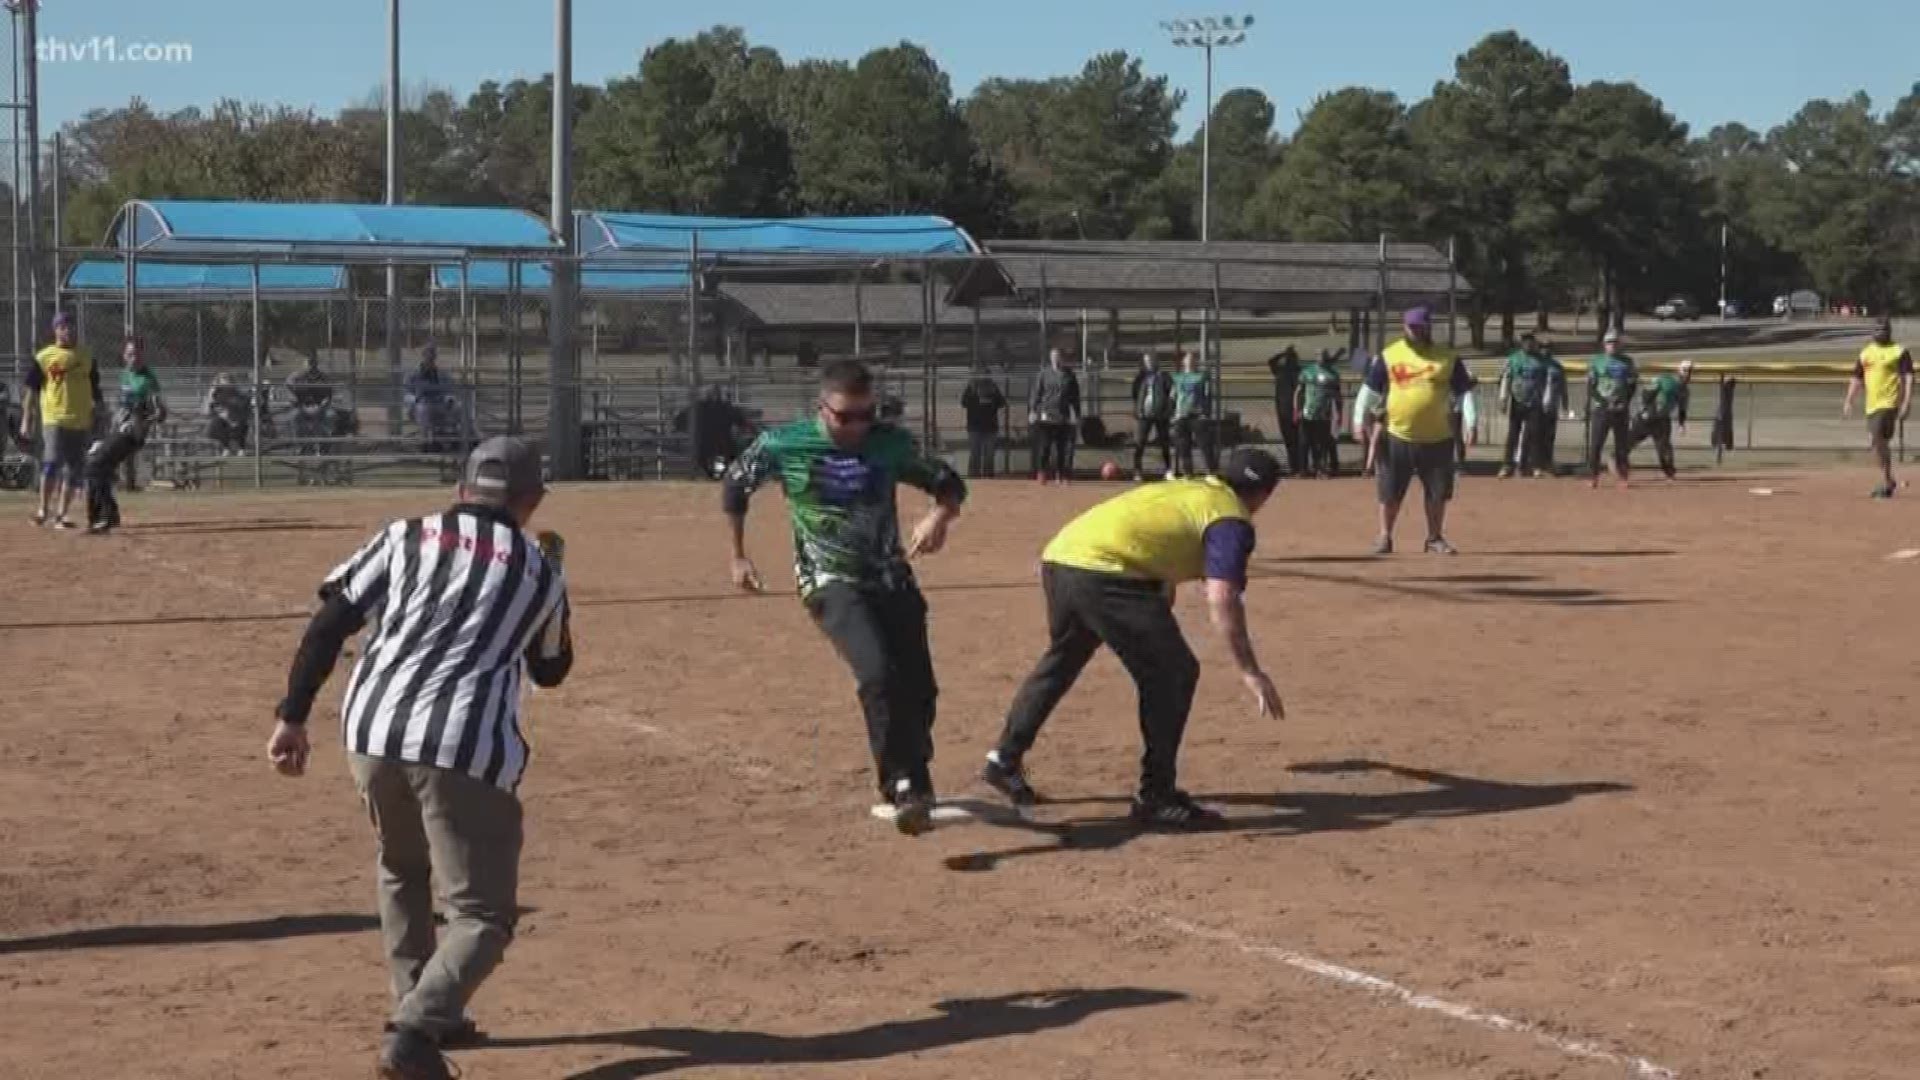 Police officers and people in recovery battled it out on the kickball field.